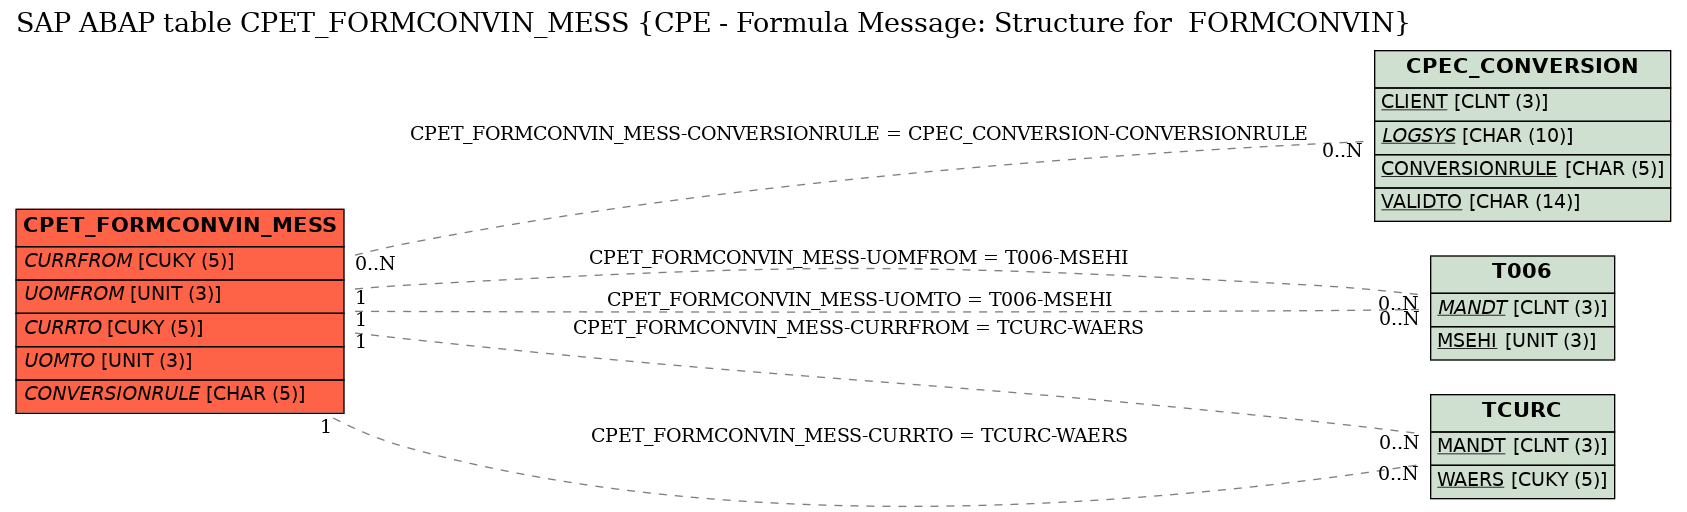 E-R Diagram for table CPET_FORMCONVIN_MESS (CPE - Formula Message: Structure for  FORMCONVIN)